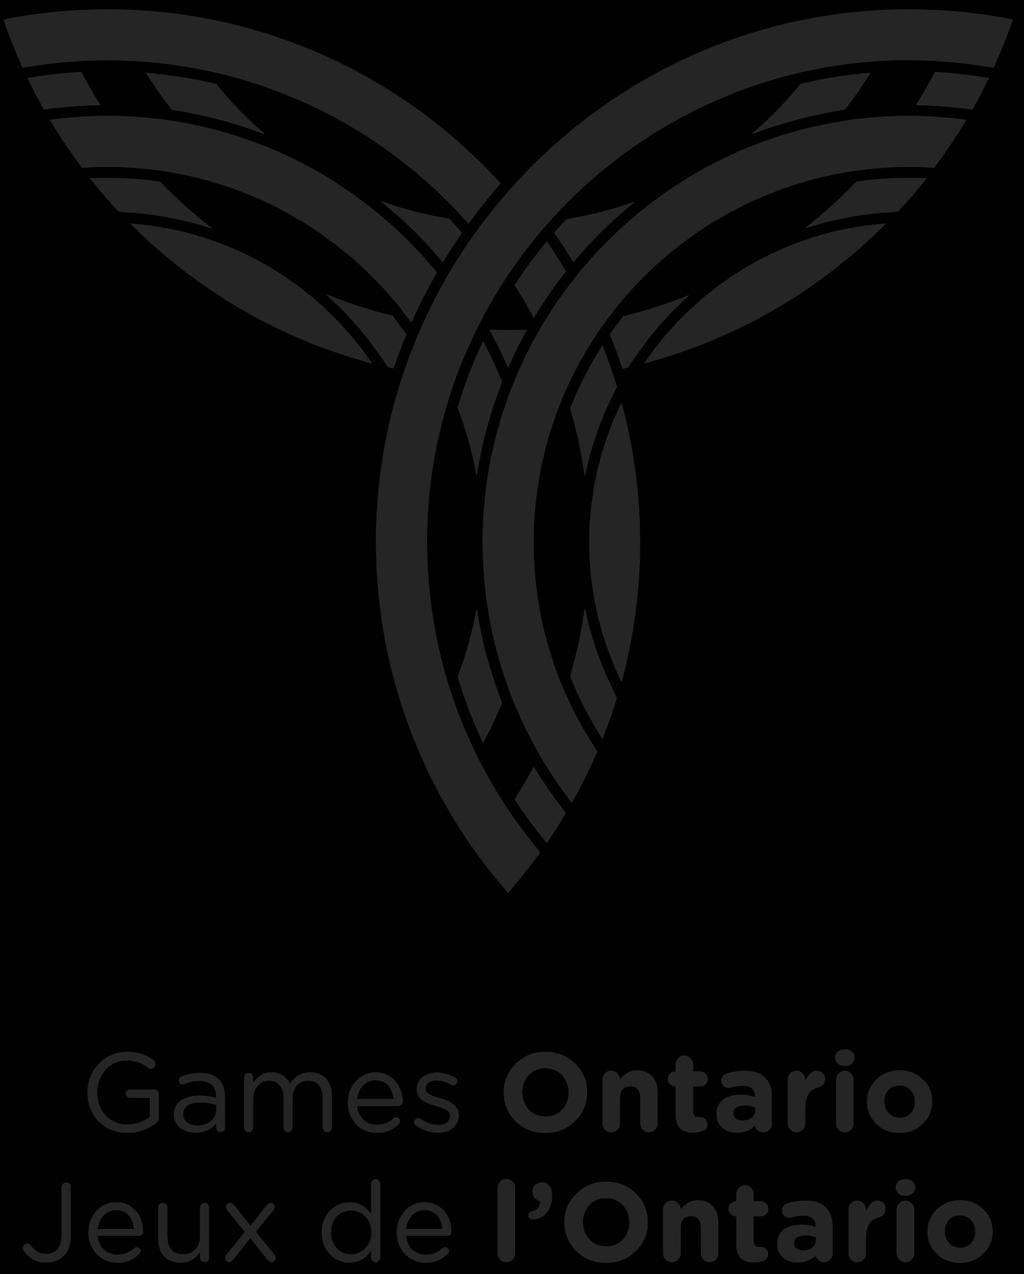 Elements of your Bid Submissions Elements of your Bid Submissions The Bid Submission must provide a clear indication of how your community would successfully host the Ontario Games.